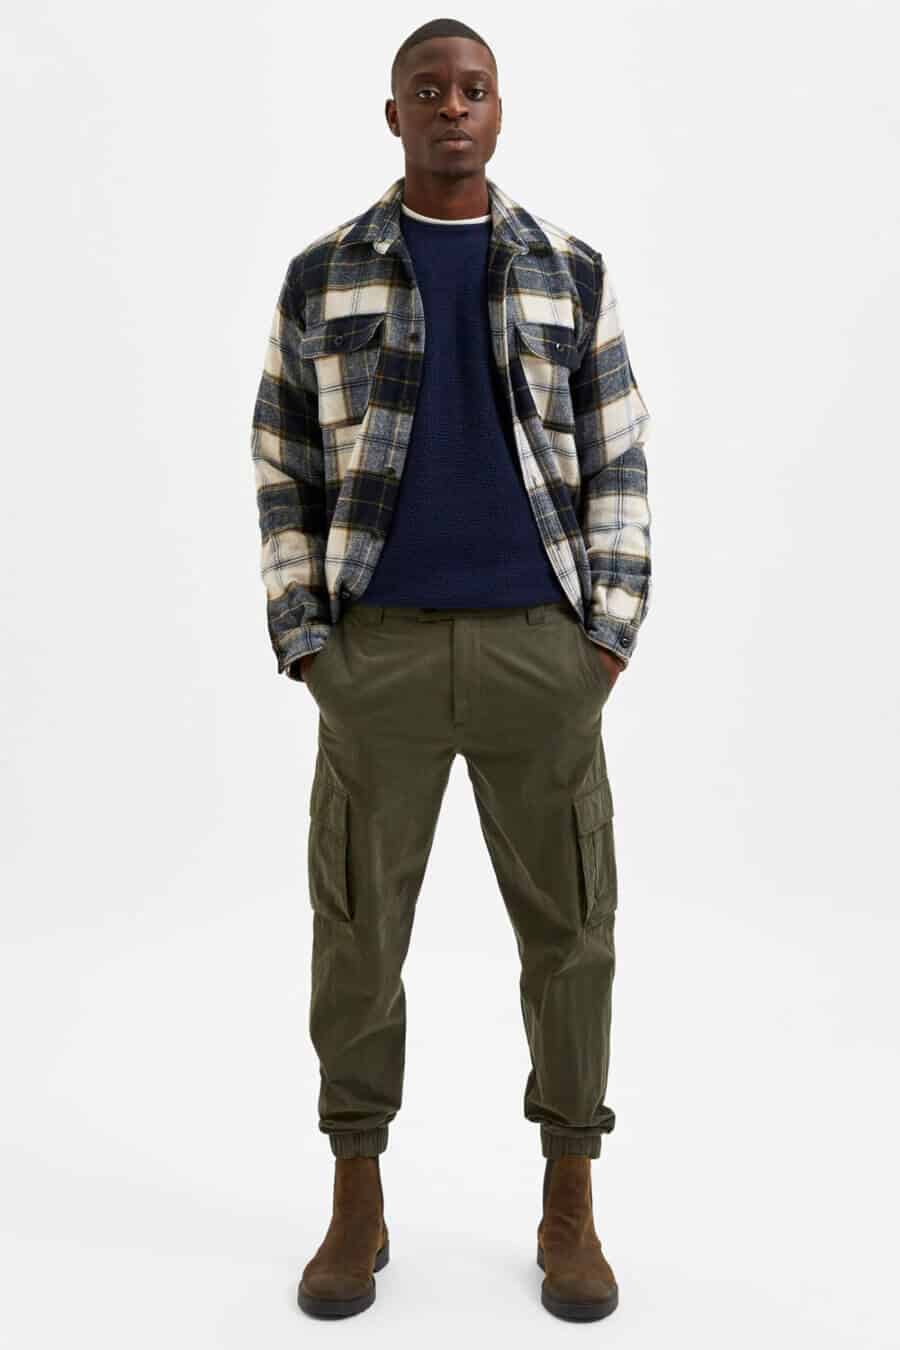 Men's green cargo pants, flannel over shirt and chelsea boots outfit